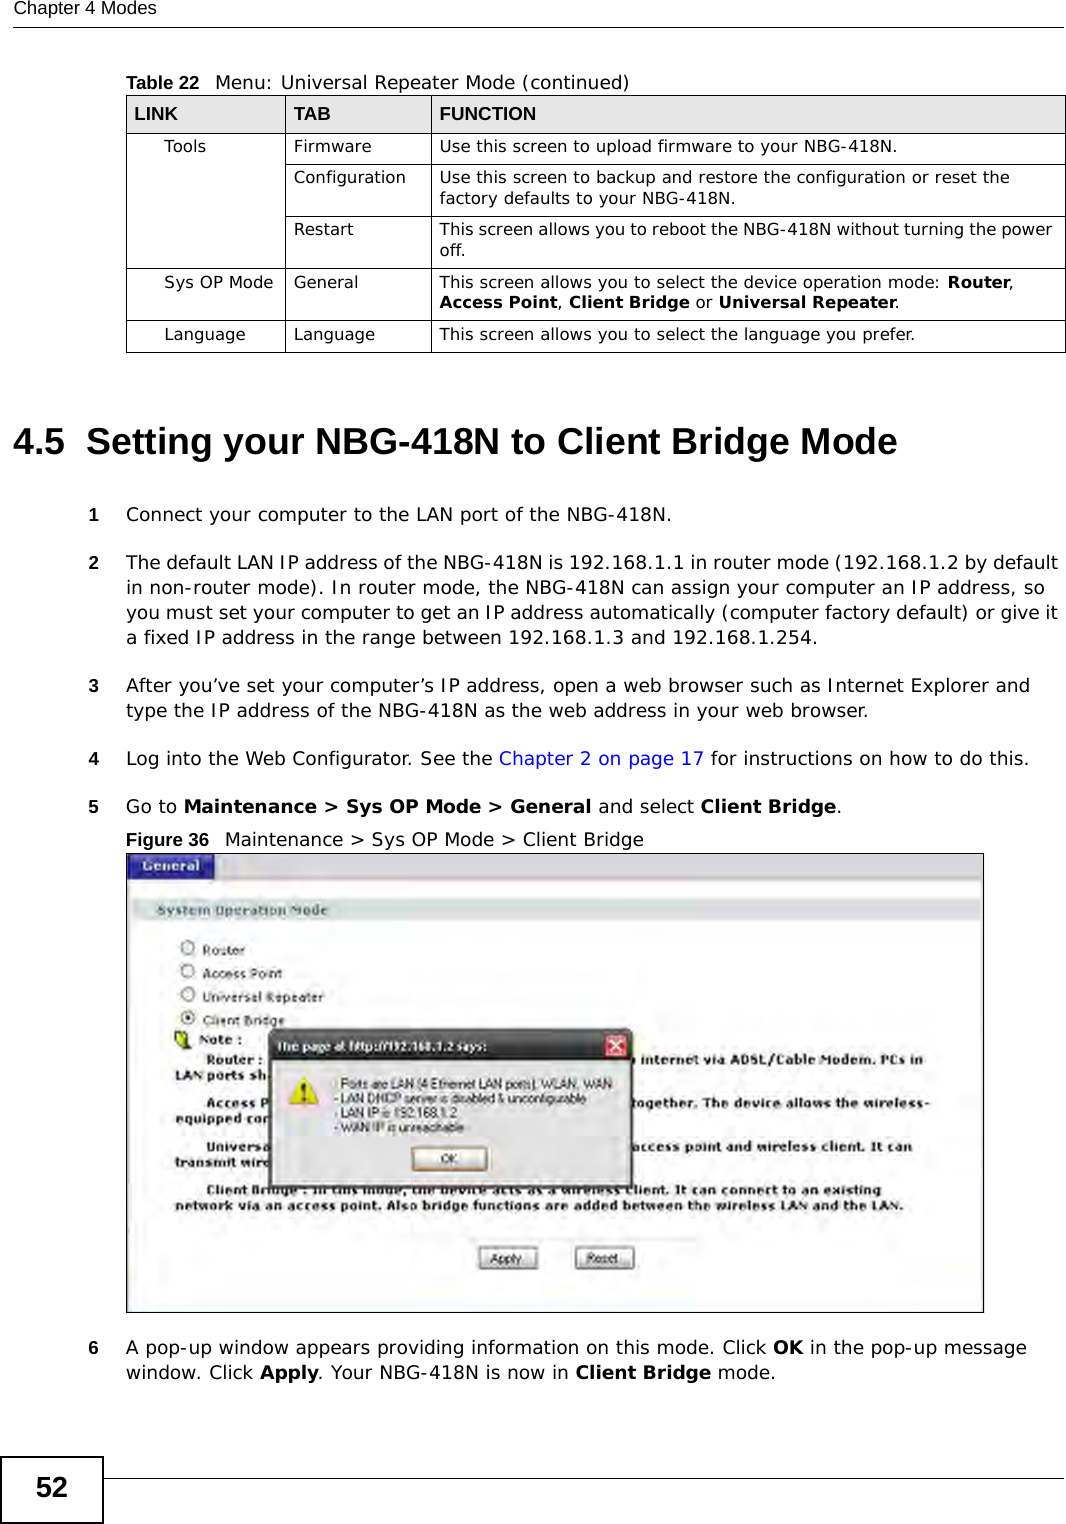 Chapter 4 Modes524.5  Setting your NBG-418N to Client Bridge Mode1Connect your computer to the LAN port of the NBG-418N. 2The default LAN IP address of the NBG-418N is 192.168.1.1 in router mode (192.168.1.2 by default in non-router mode). In router mode, the NBG-418N can assign your computer an IP address, so you must set your computer to get an IP address automatically (computer factory default) or give it a fixed IP address in the range between 192.168.1.3 and 192.168.1.254.3After you’ve set your computer’s IP address, open a web browser such as Internet Explorer and type the IP address of the NBG-418N as the web address in your web browser.4Log into the Web Configurator. See the Chapter 2 on page 17 for instructions on how to do this.5Go to Maintenance &gt; Sys OP Mode &gt; General and select Client Bridge.Figure 36   Maintenance &gt; Sys OP Mode &gt; Client Bridge 6A pop-up window appears providing information on this mode. Click OK in the pop-up message window. Click Apply. Your NBG-418N is now in Client Bridge mode.Tools Firmware Use this screen to upload firmware to your NBG-418N.Configuration Use this screen to backup and restore the configuration or reset the factory defaults to your NBG-418N. Restart This screen allows you to reboot the NBG-418N without turning the power off.Sys OP Mode General This screen allows you to select the device operation mode: Router, Access Point, Client Bridge or Universal Repeater.Language Language This screen allows you to select the language you prefer.Table 22   Menu: Universal Repeater Mode (continued)LINK TABFUNCTION